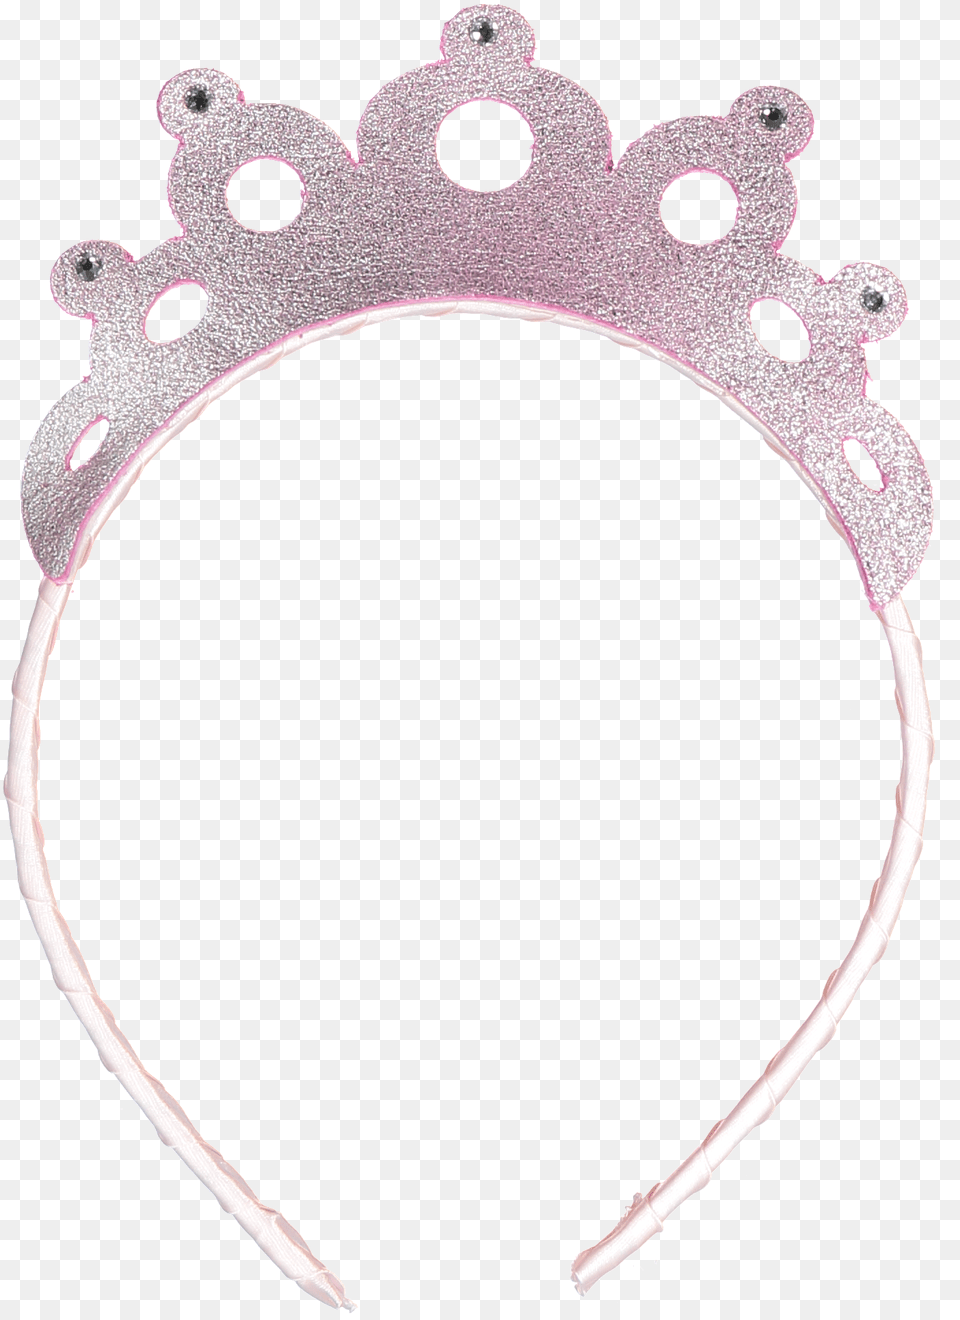 Crown For Queen In Headband, Accessories, Jewelry, Tiara Png Image